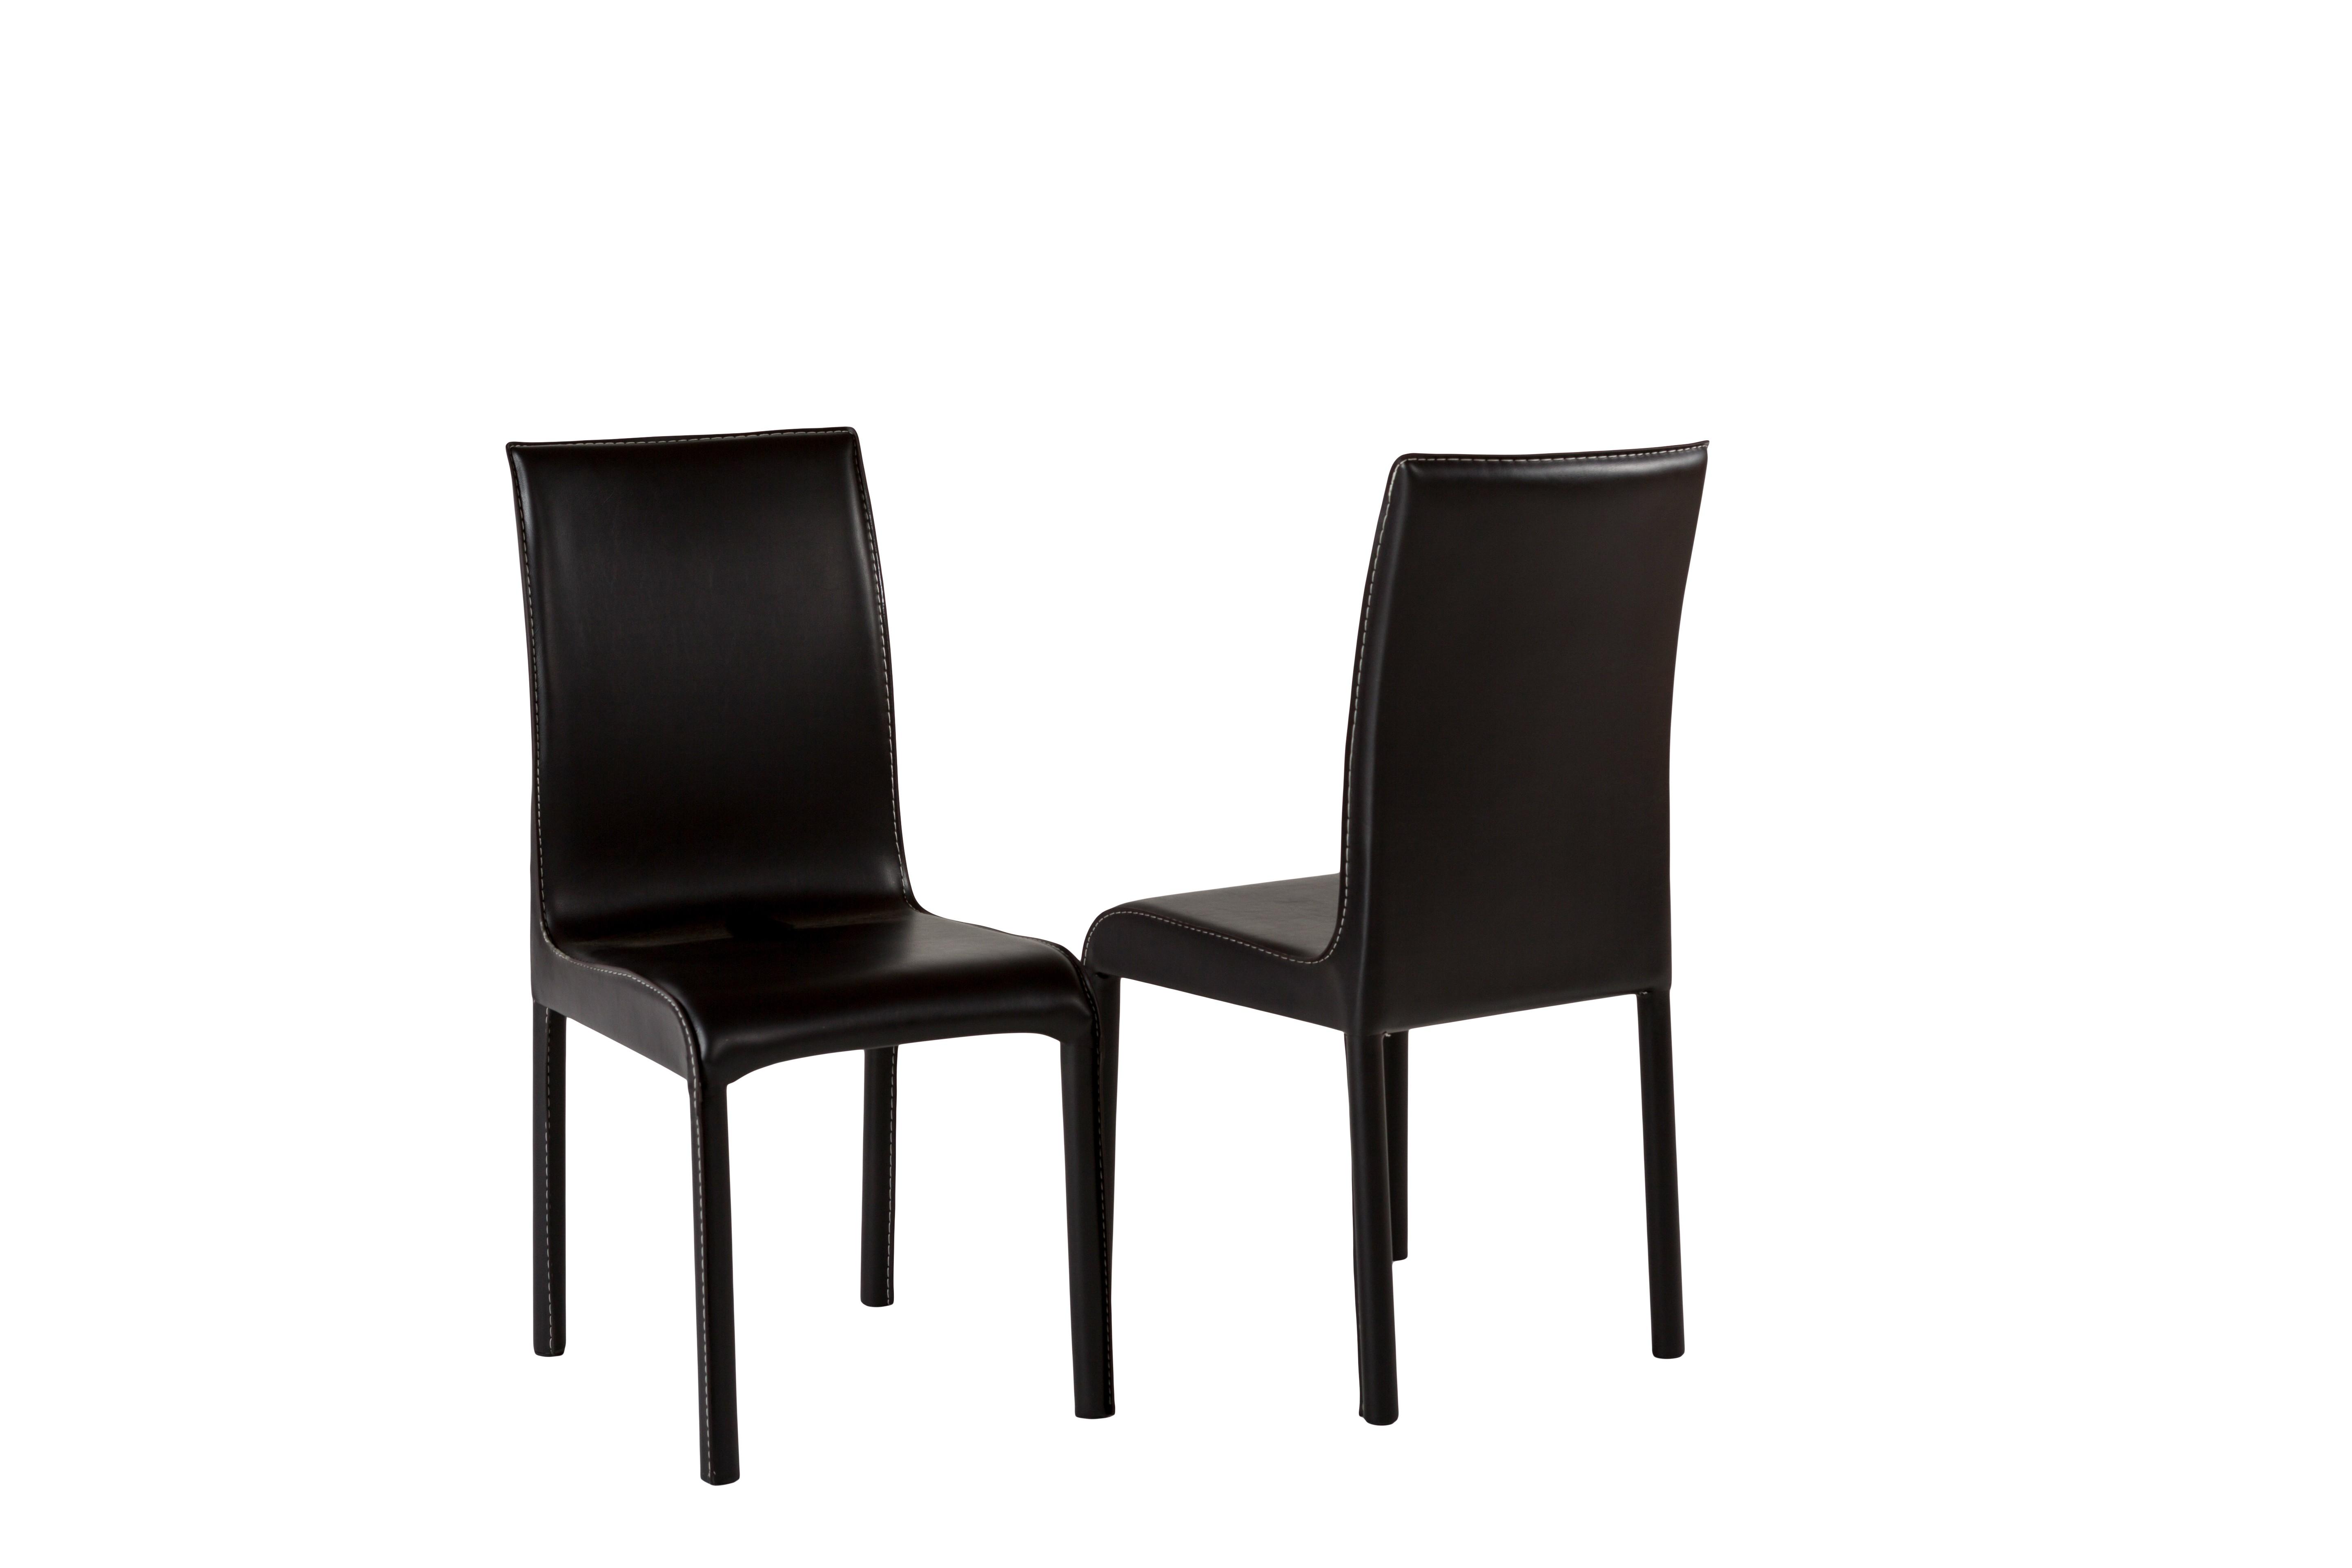 At Home USA Swansea Dining Side Chair